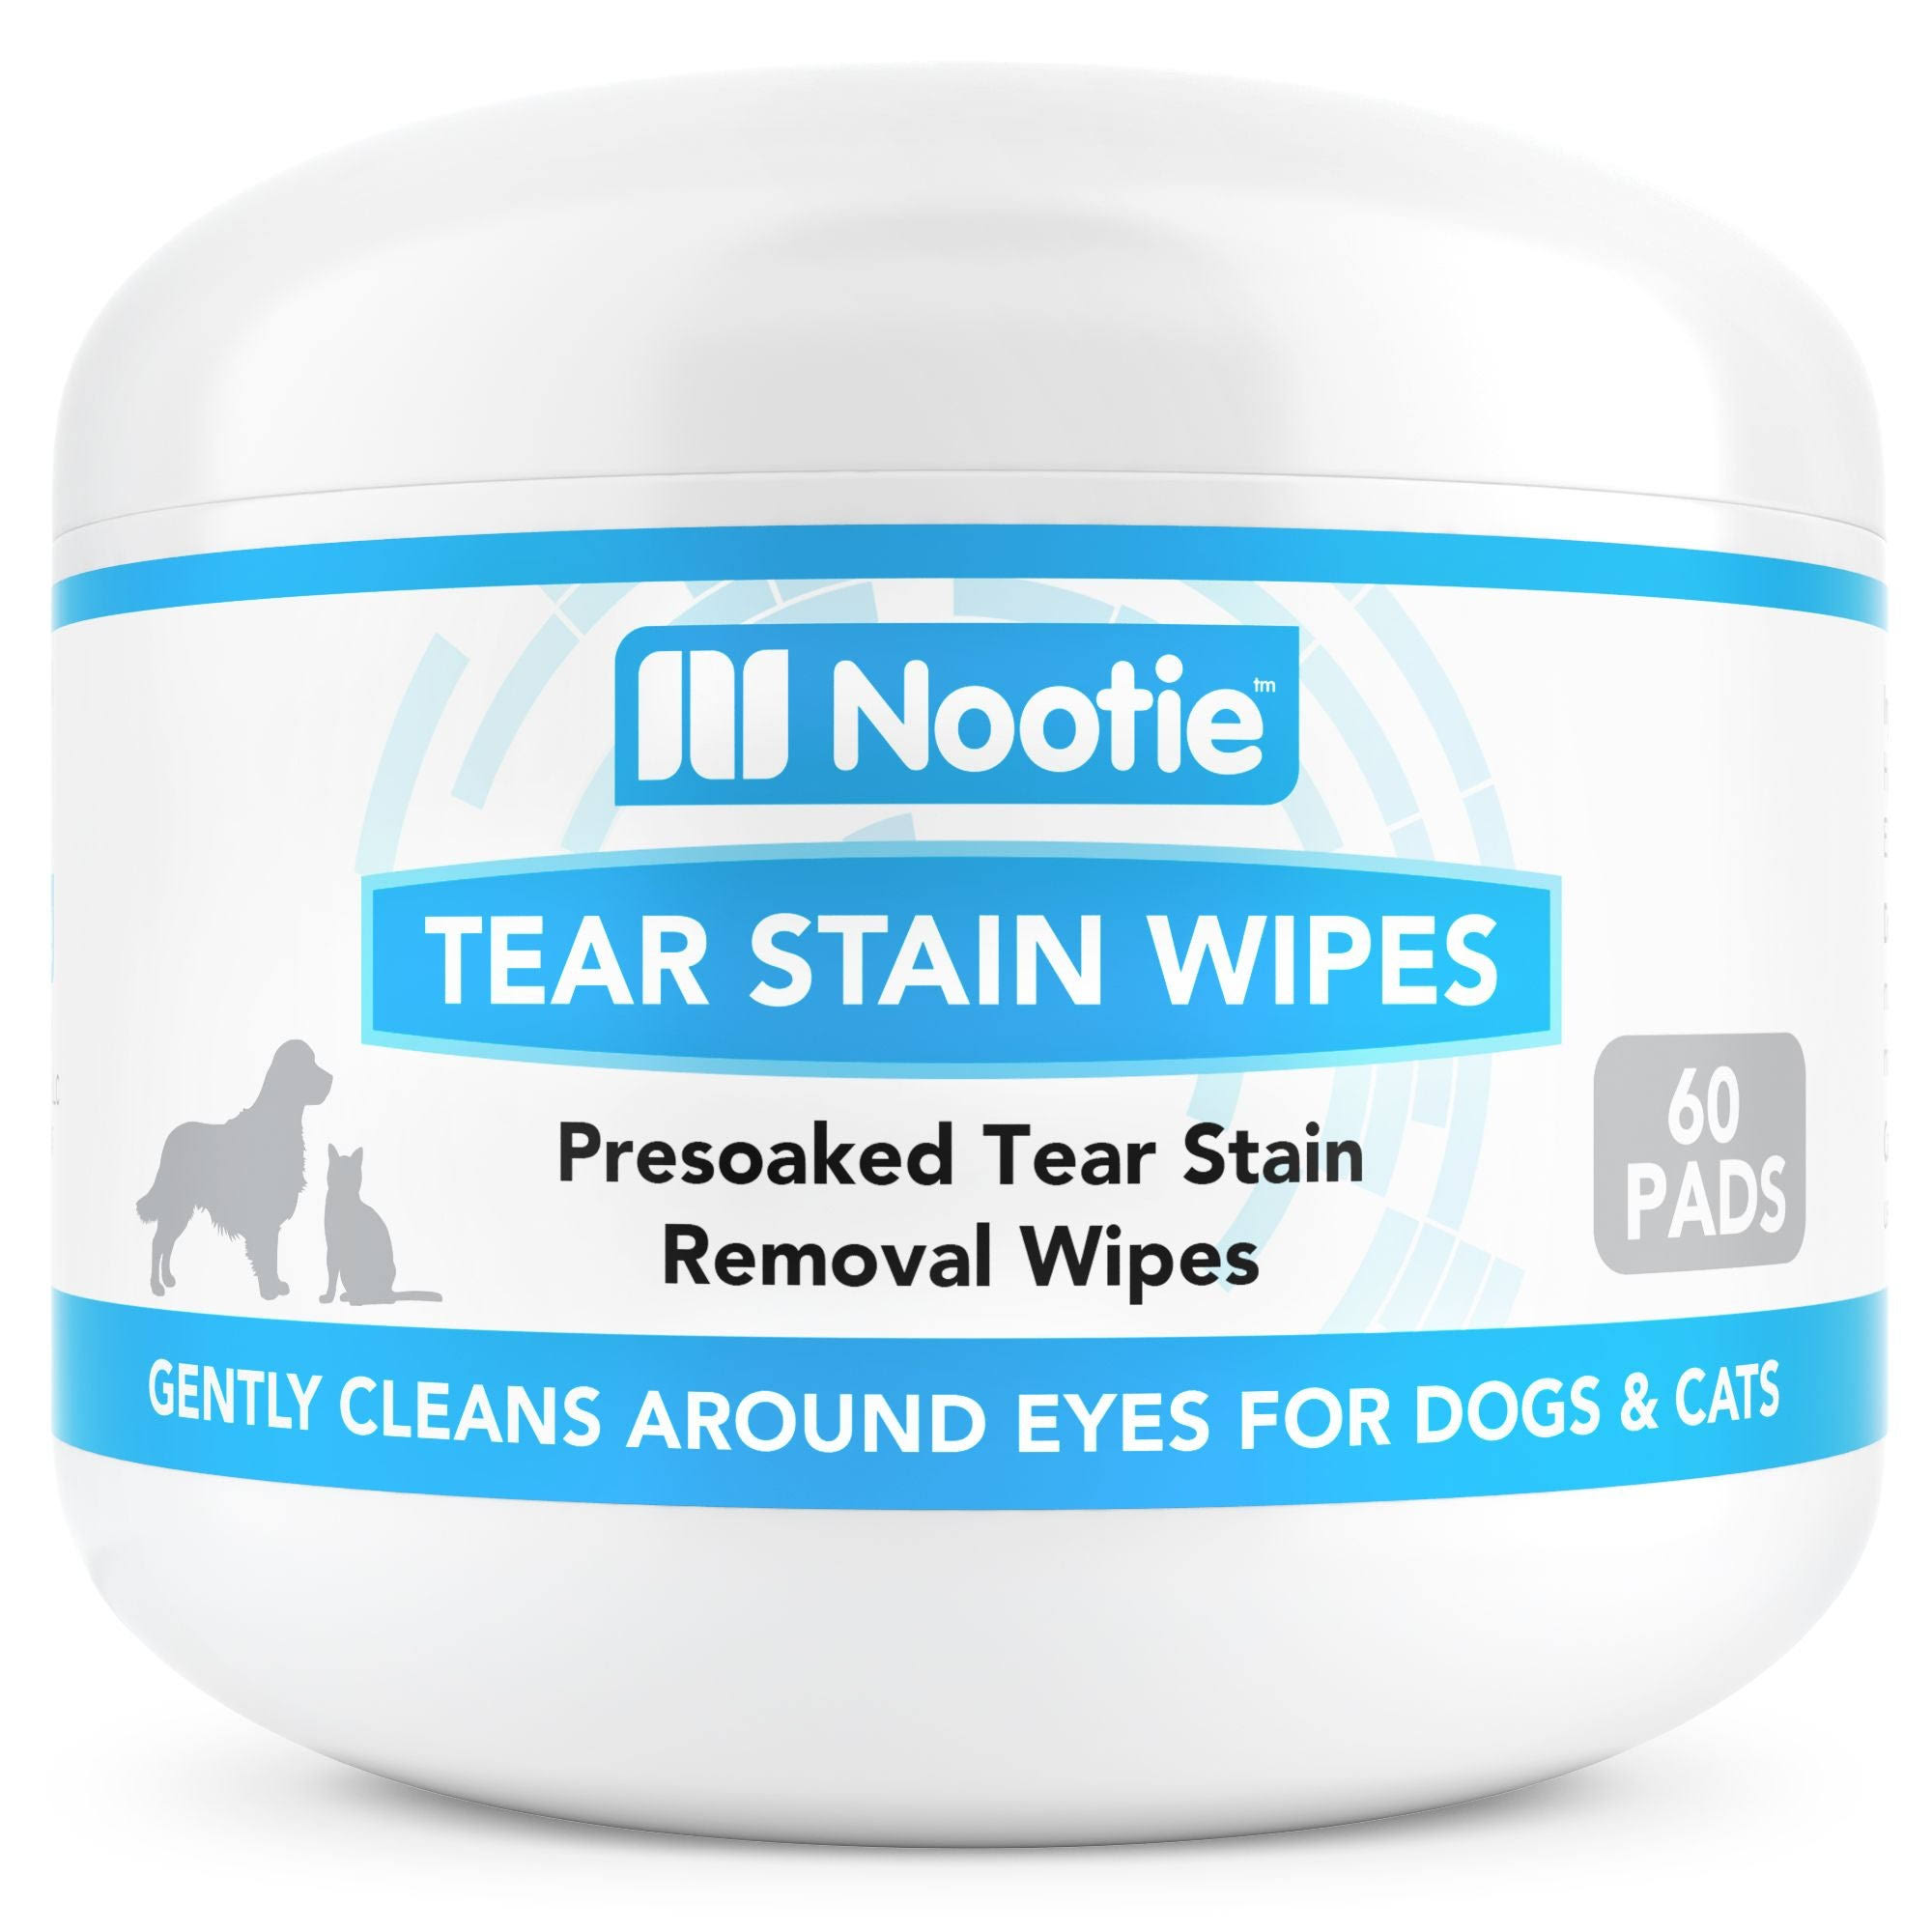 Nootie Tear Stain Wipes 60 Ct.